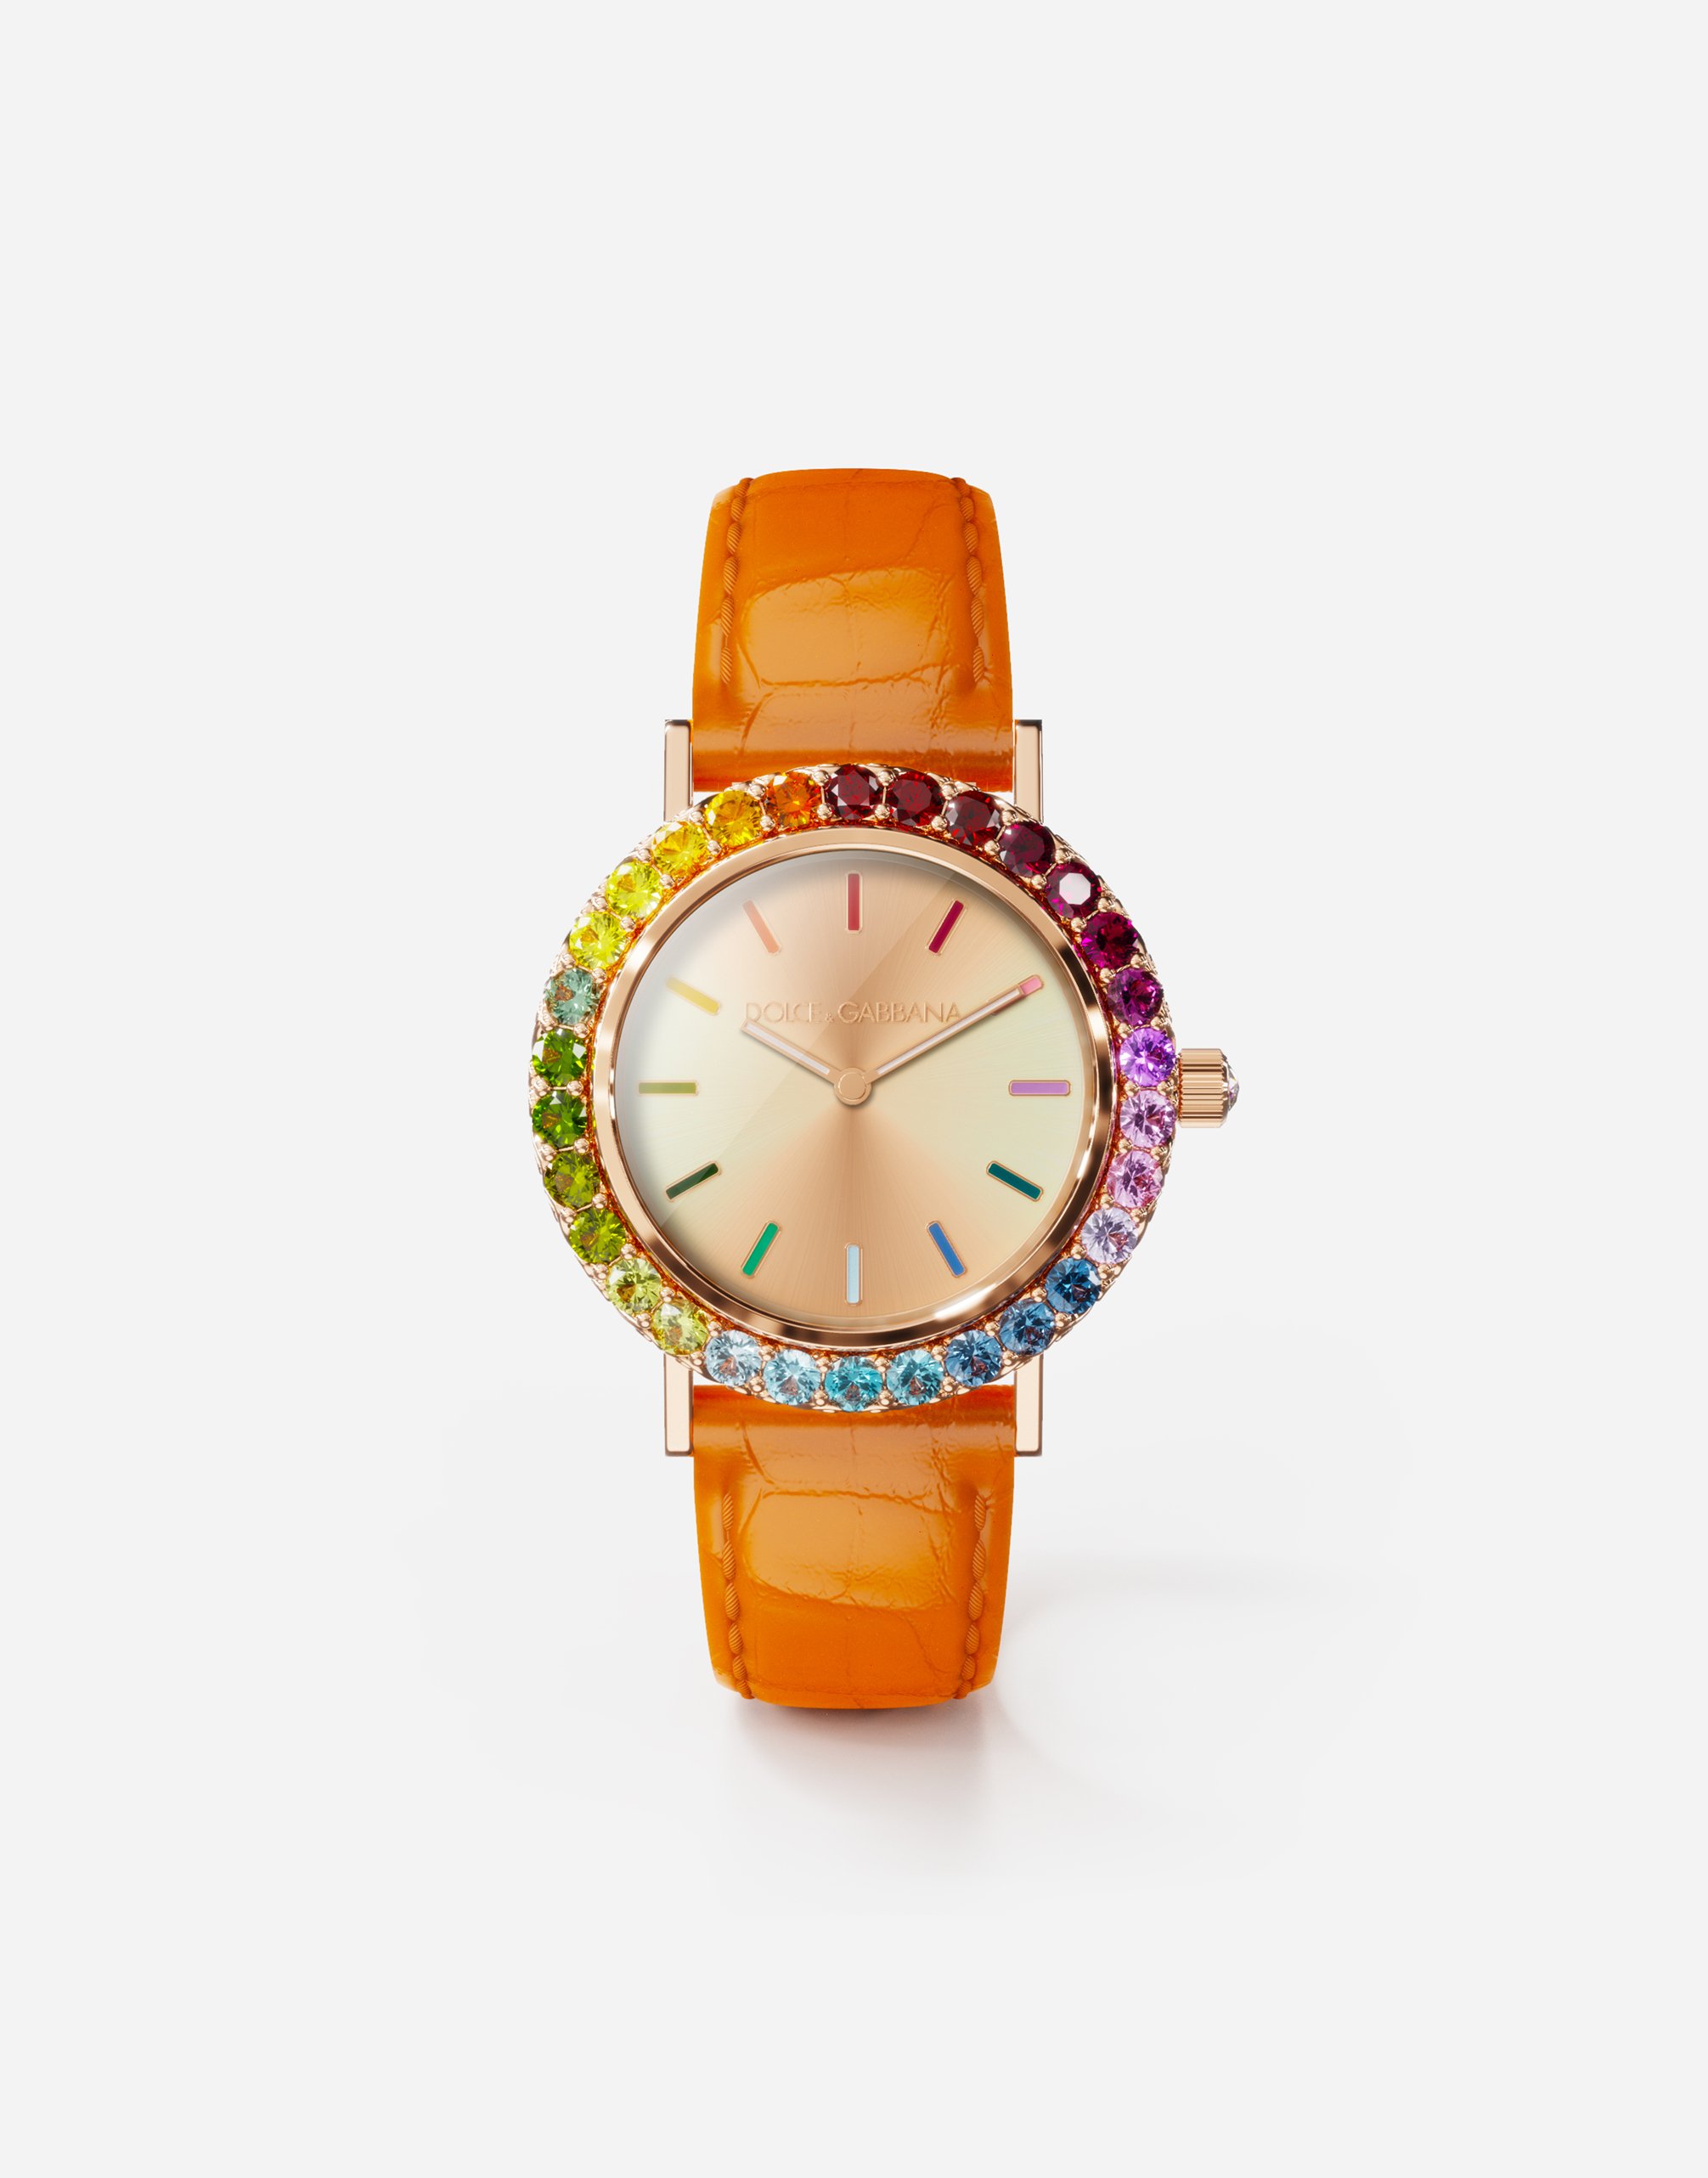 Iris watch in yellow gold with multicolored fine gems in Orange